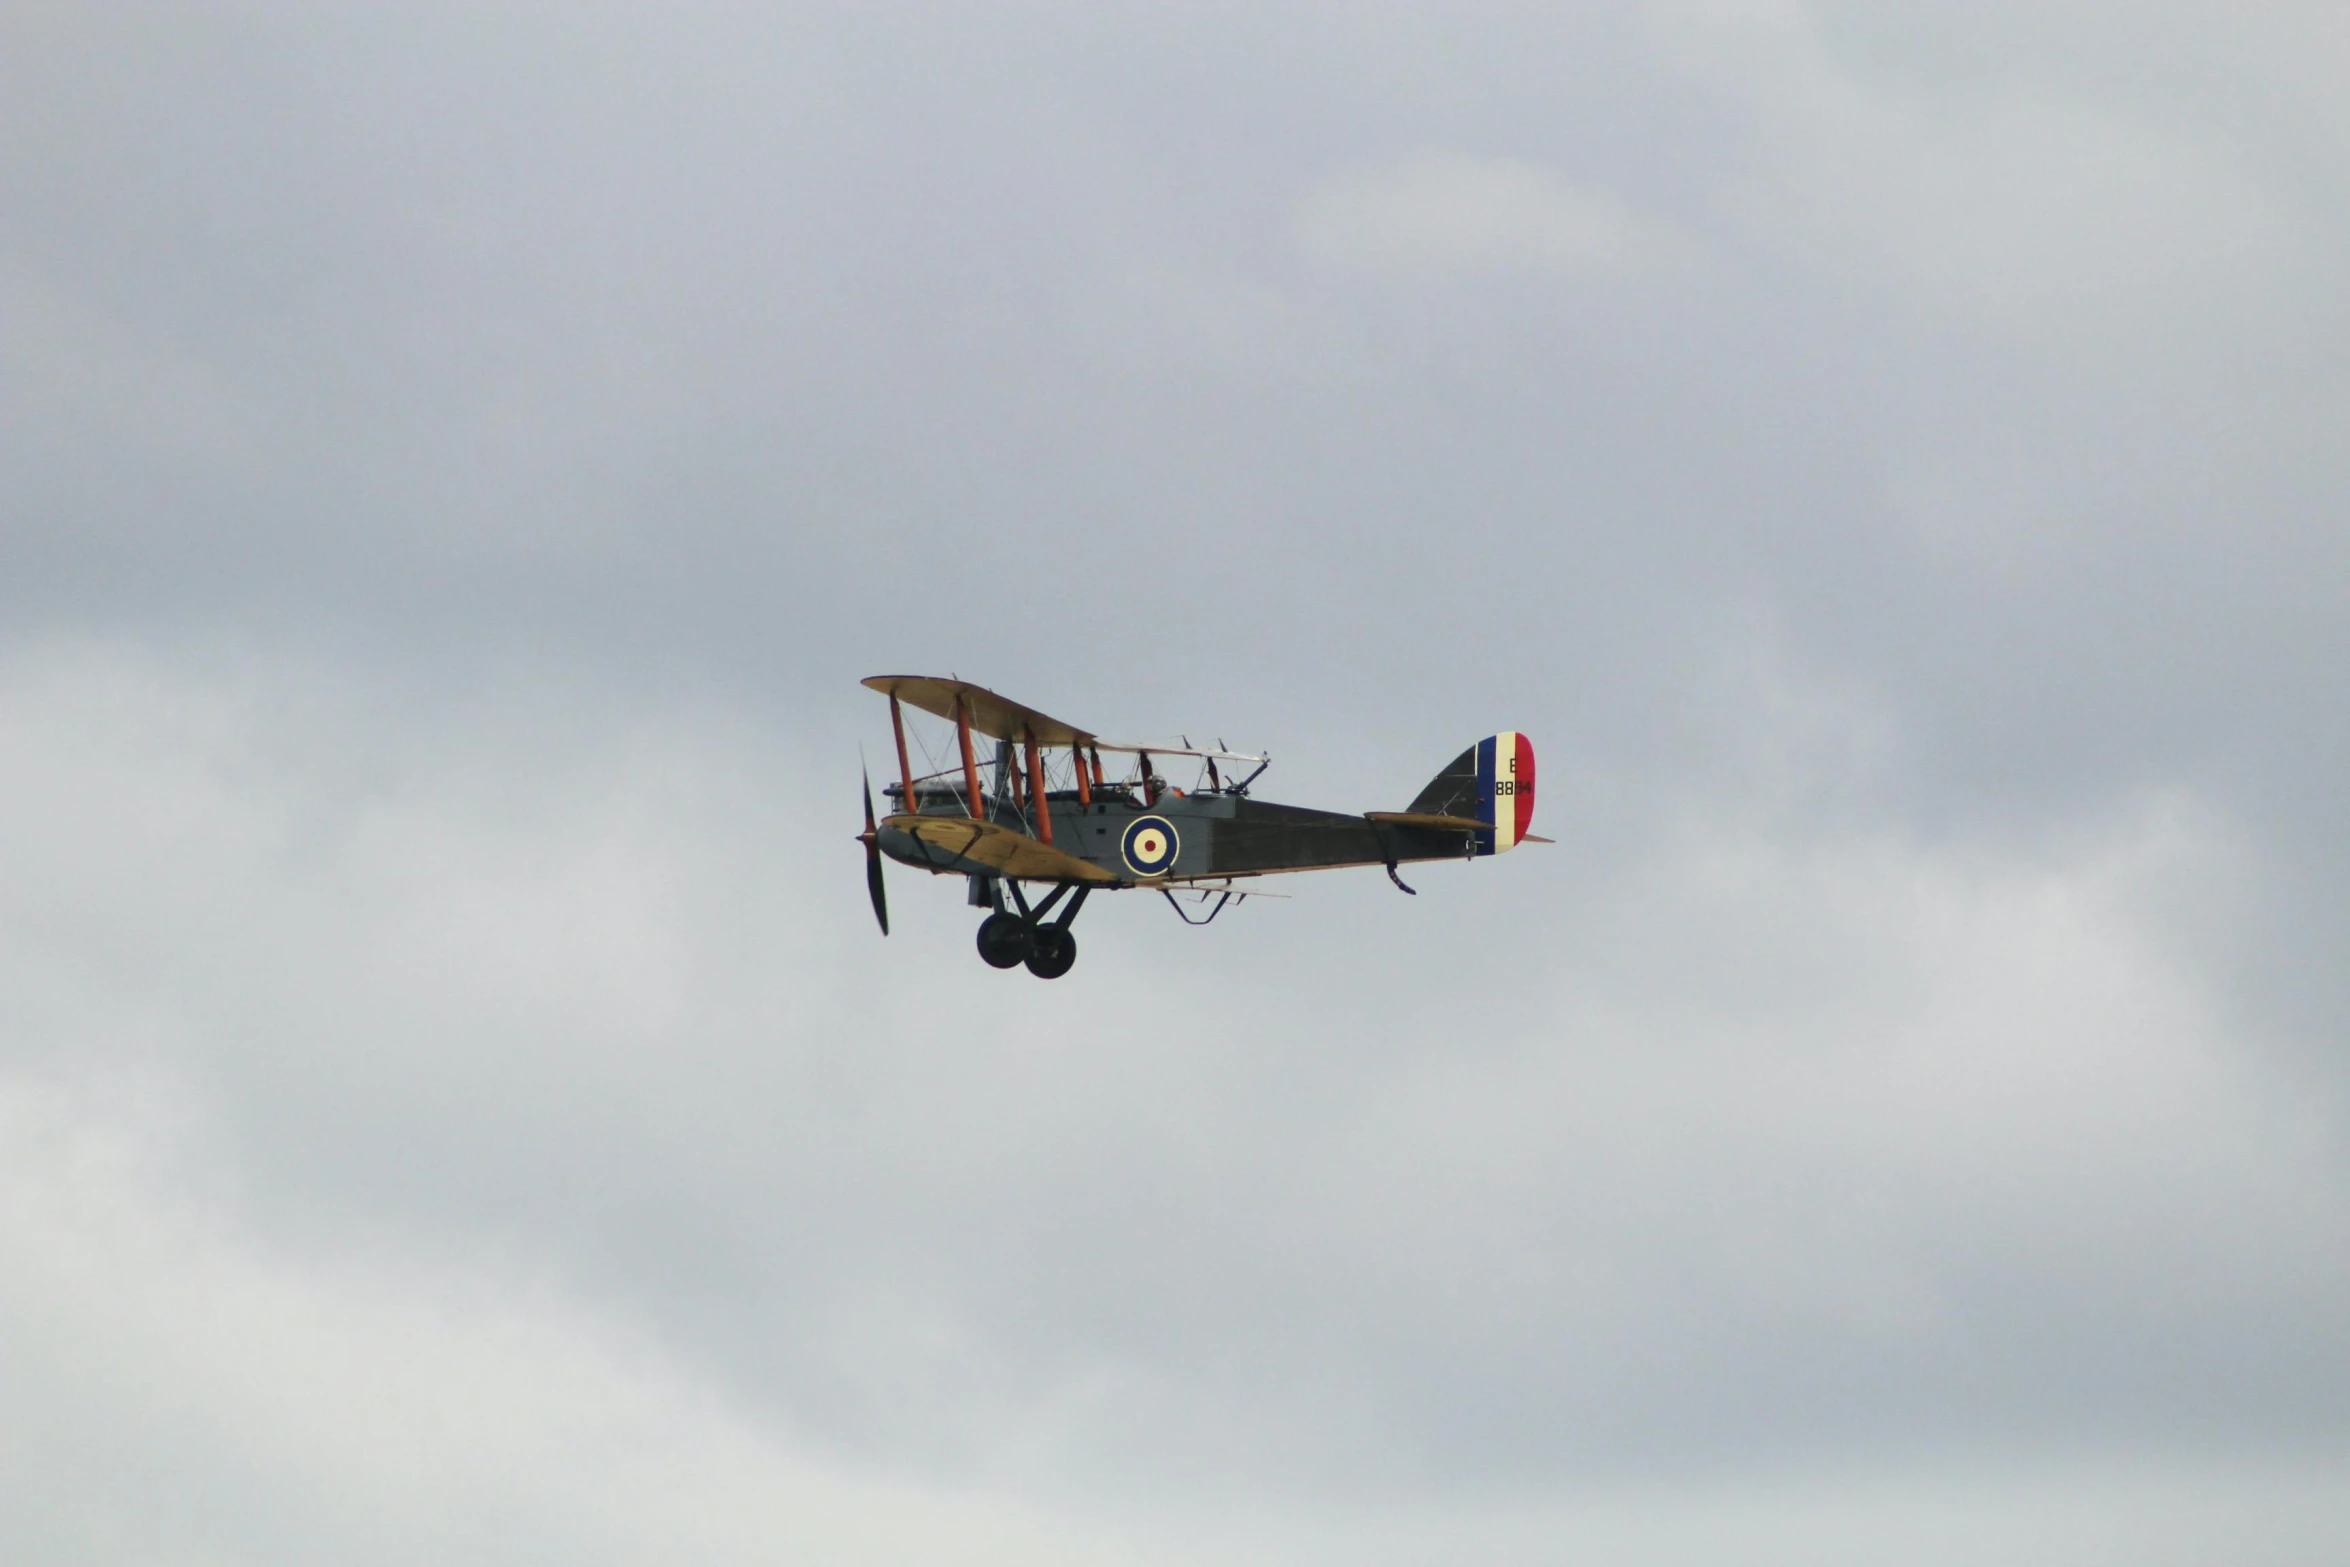 an old plane flying in the cloudy sky